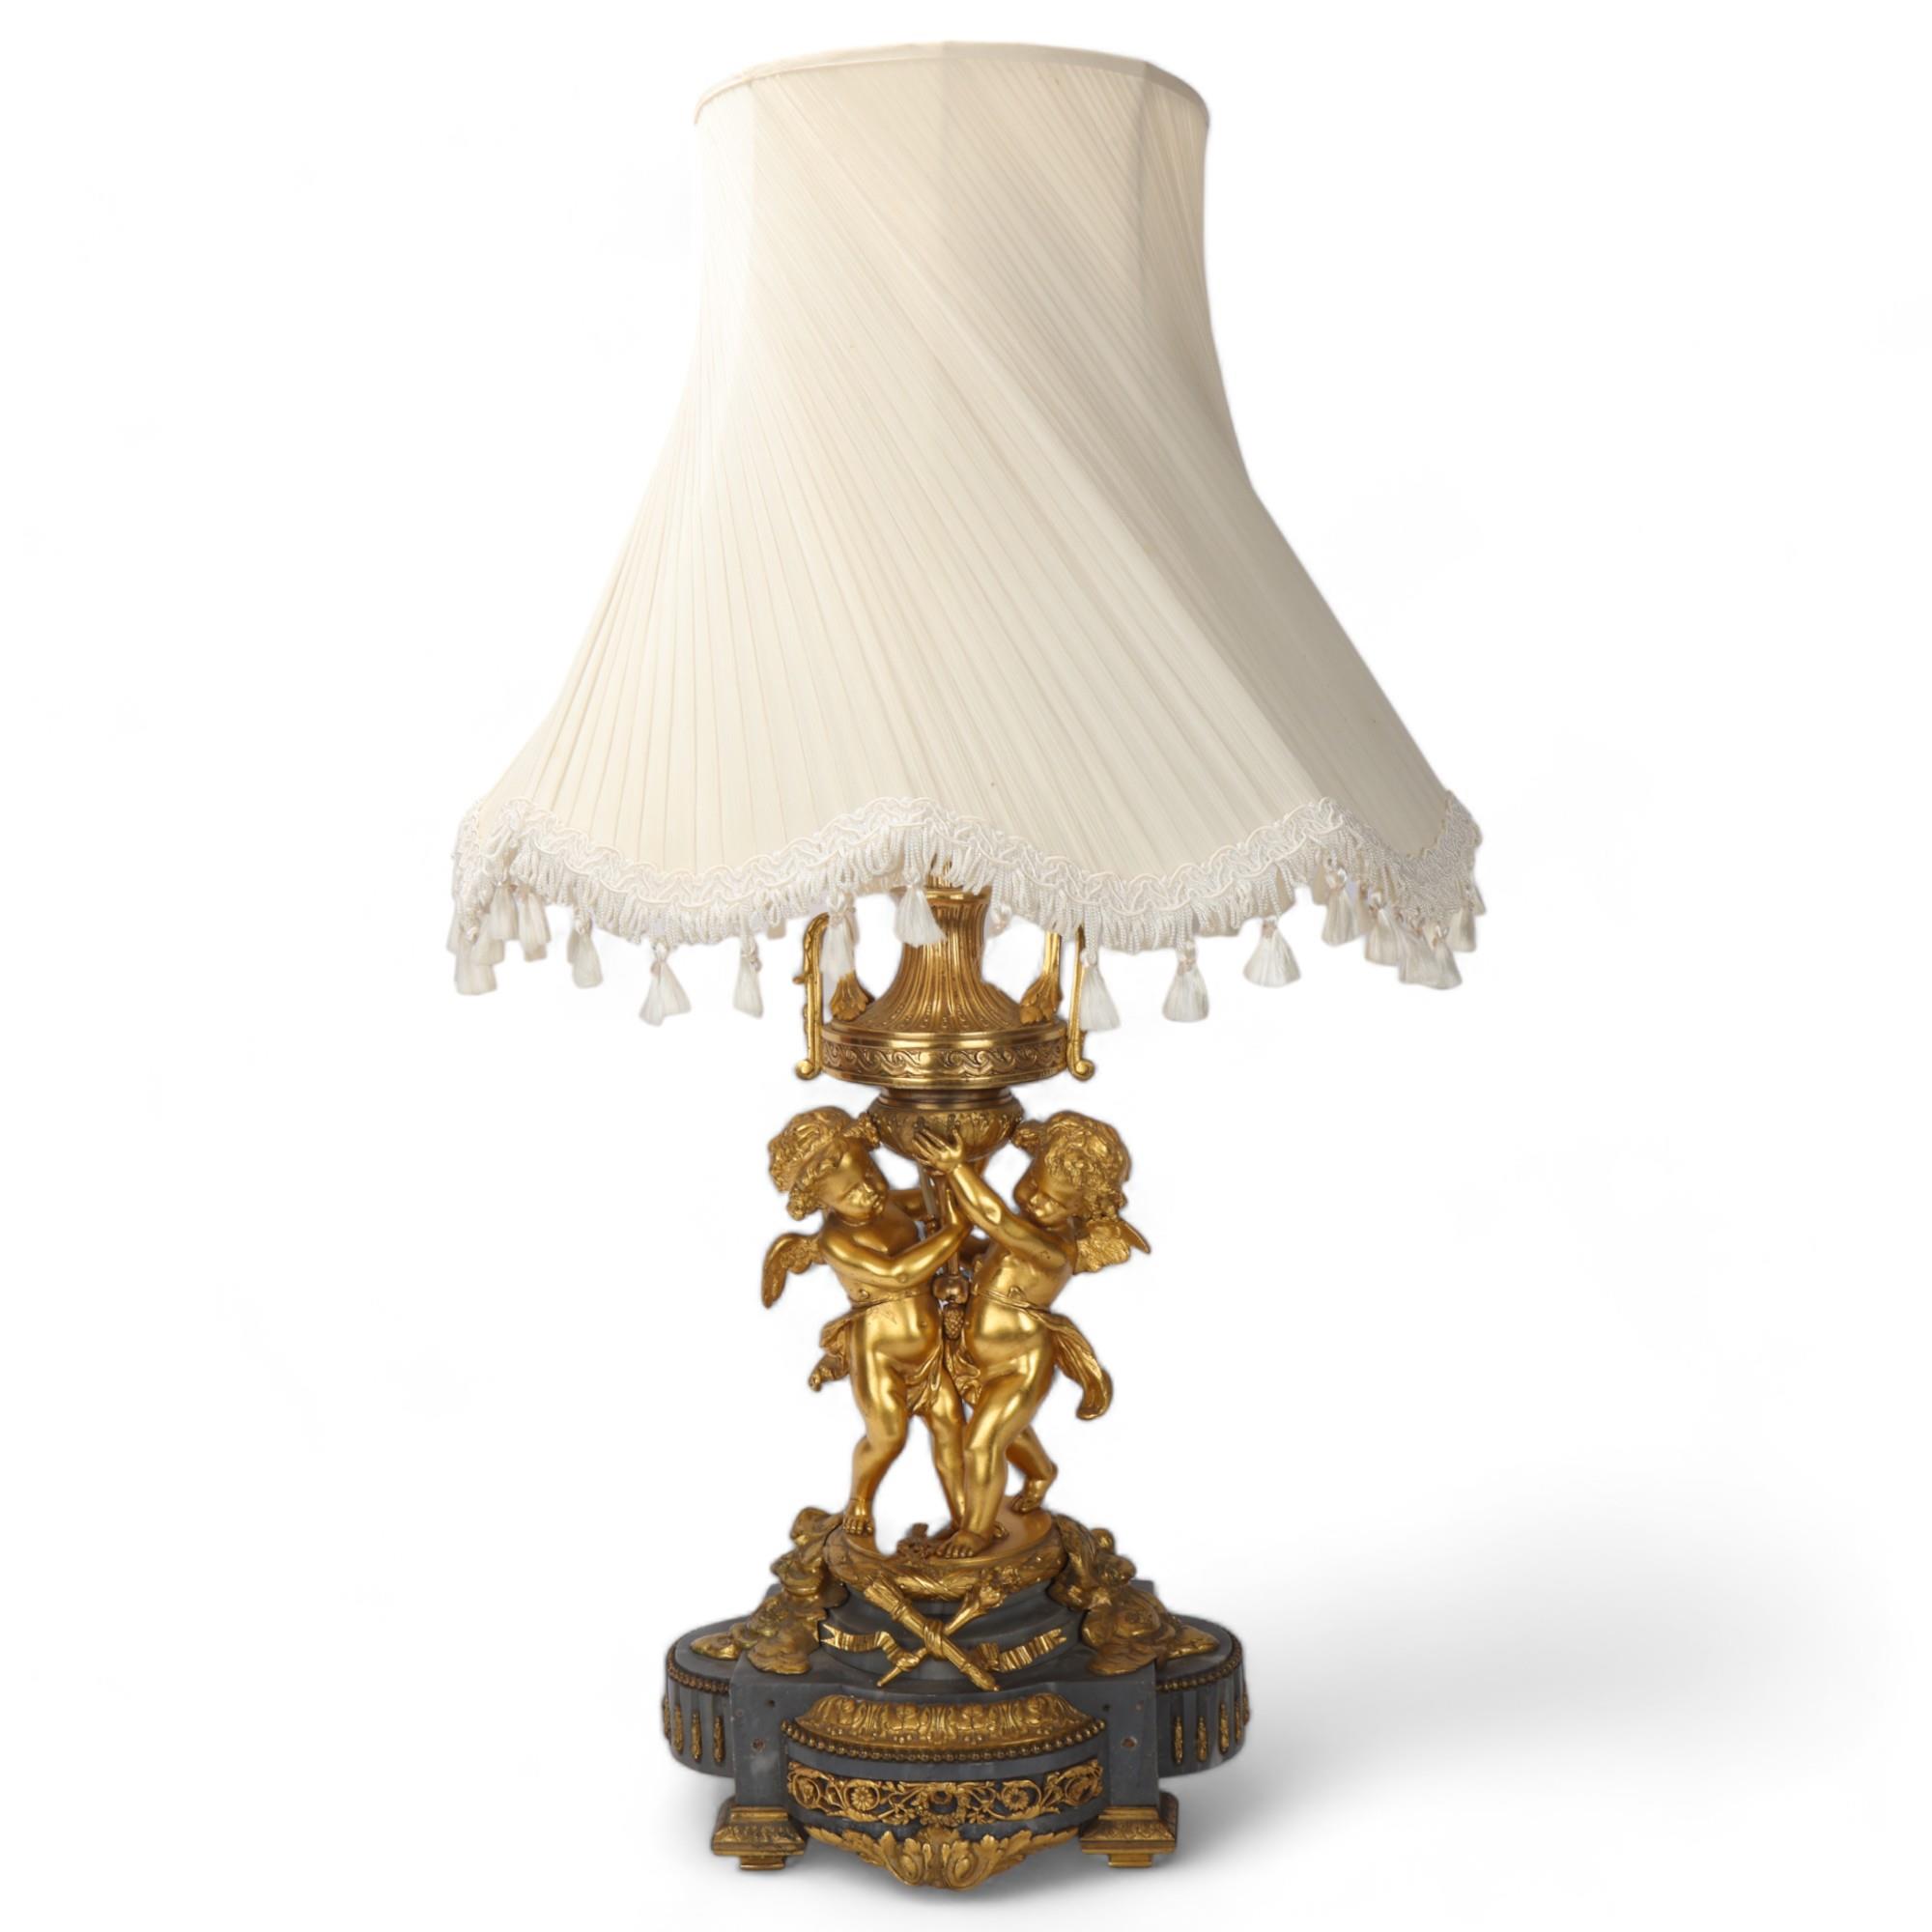 An ornate French gilt-bronze table lamp, supported by 2 cherubs, probably late 19th century, on